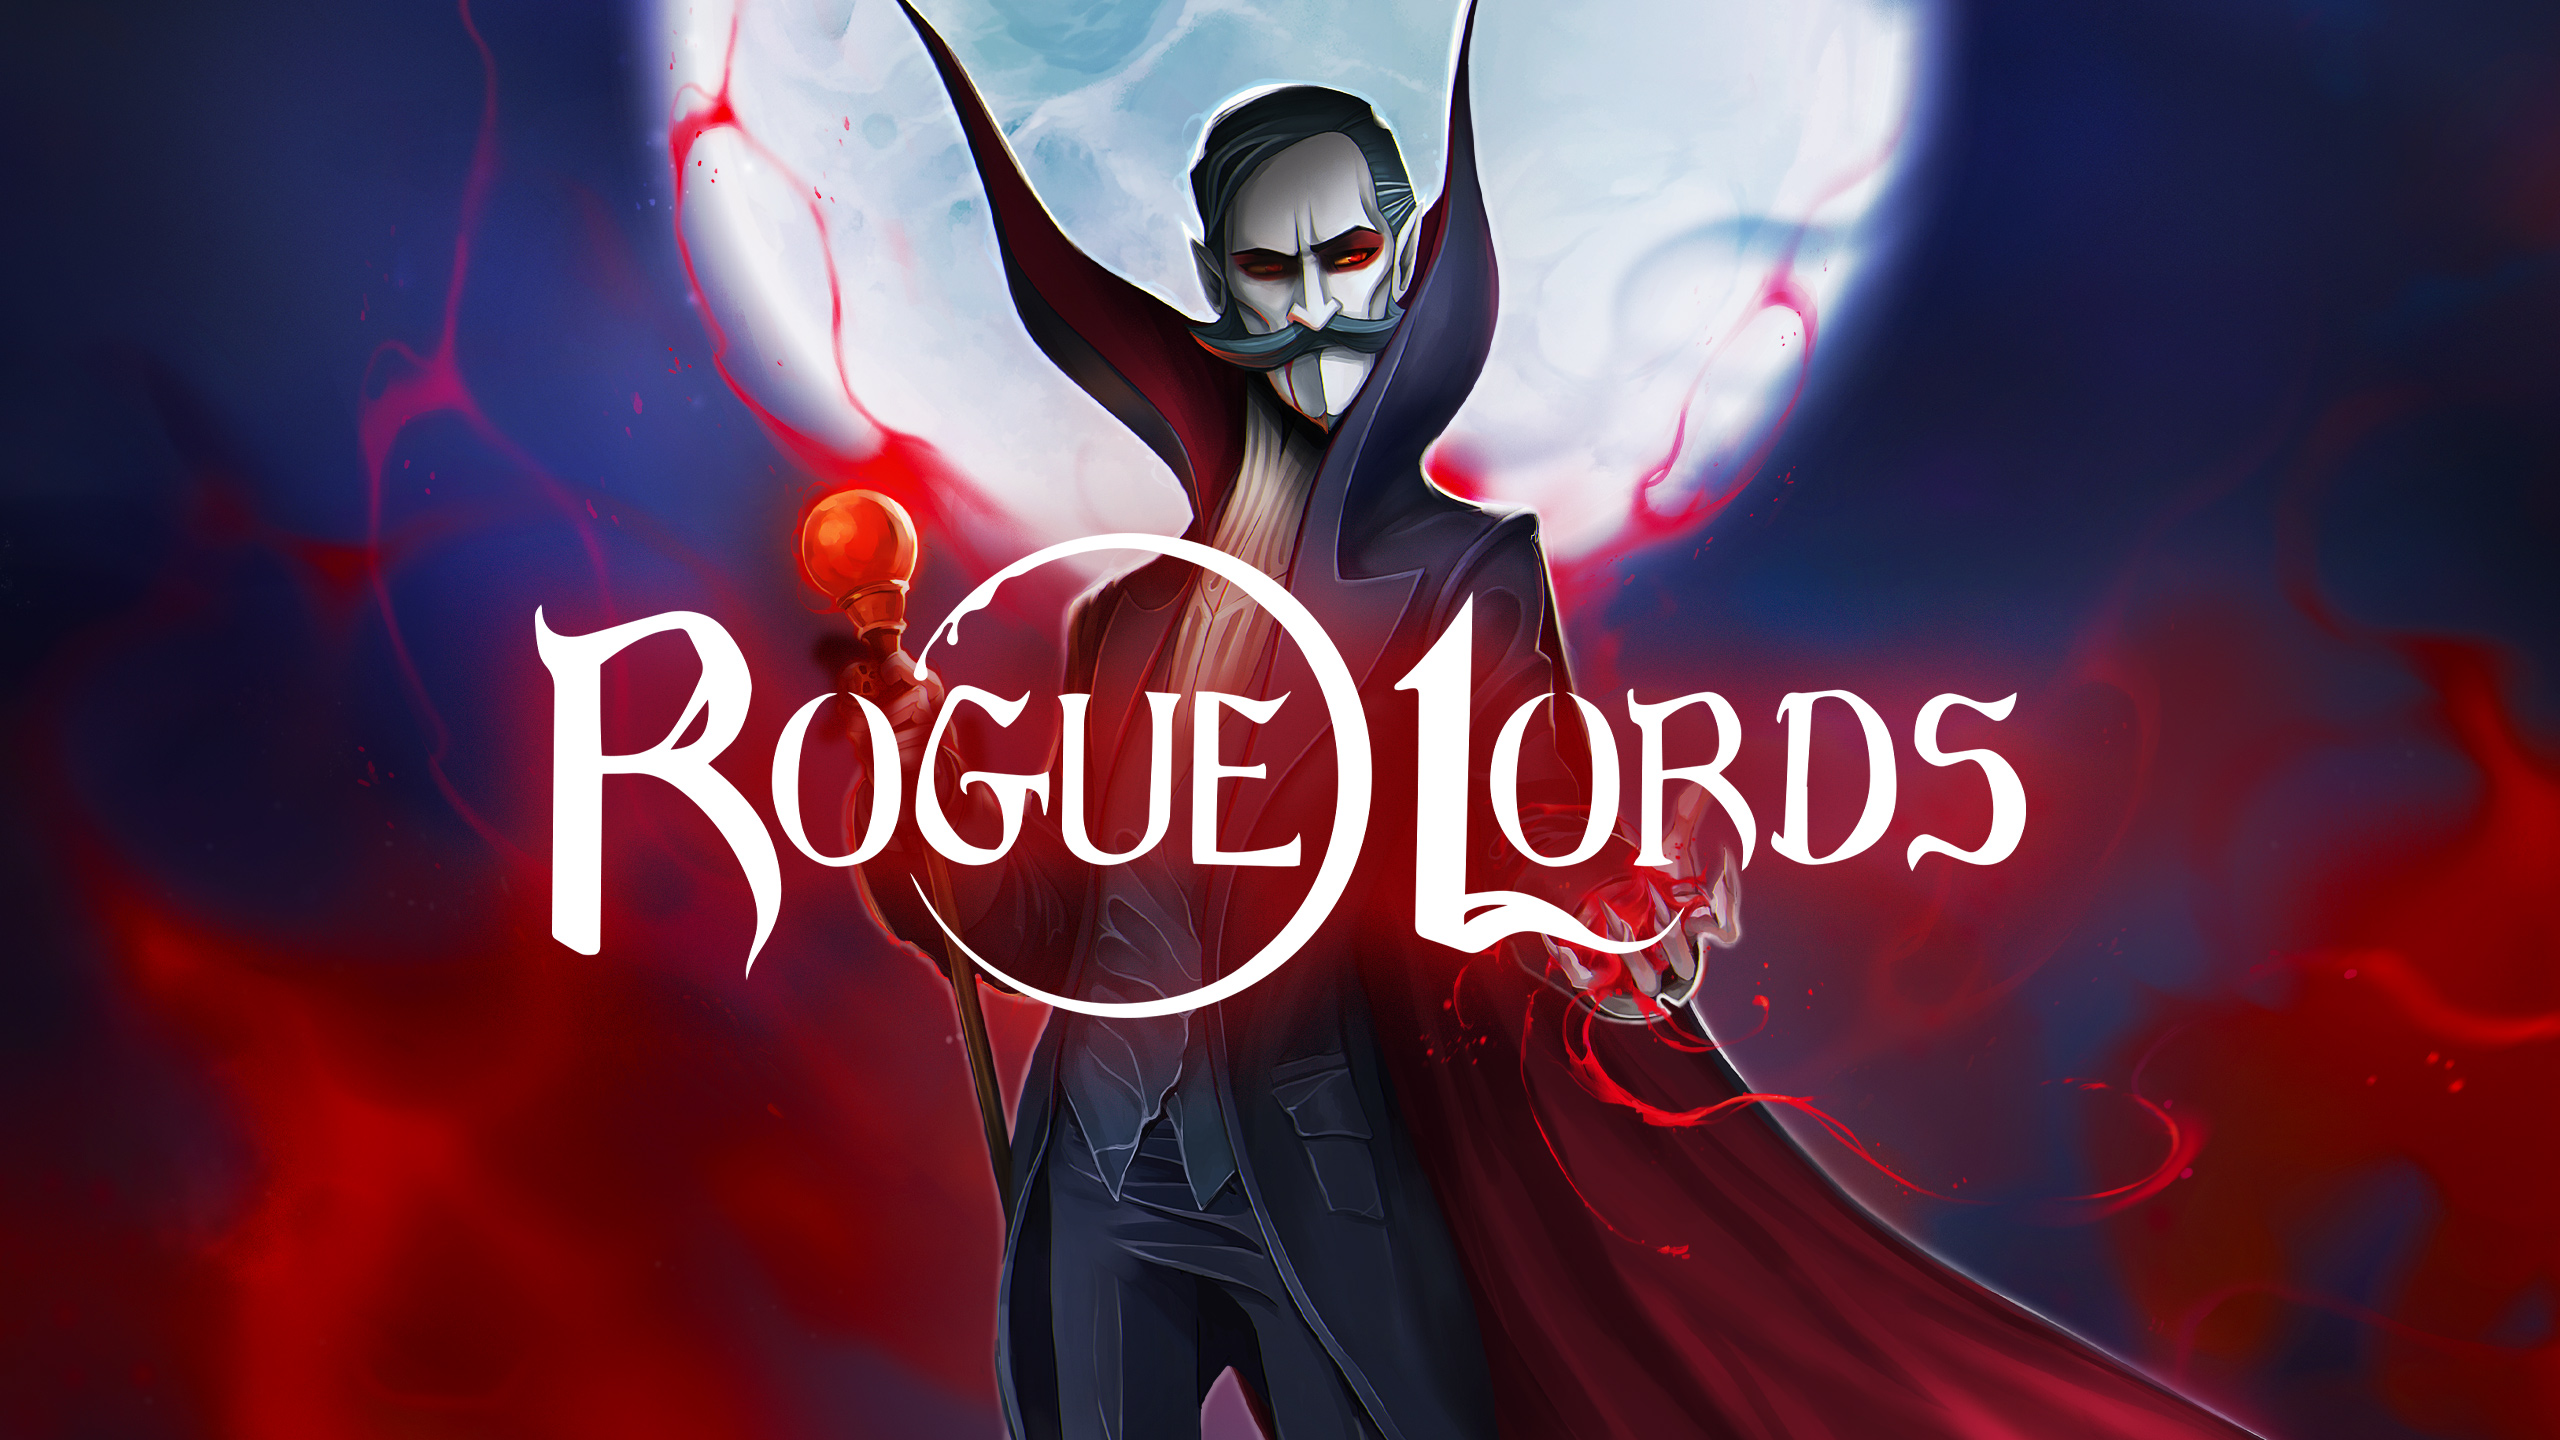 Video Game Rogue Lords HD Wallpaper | Background Image